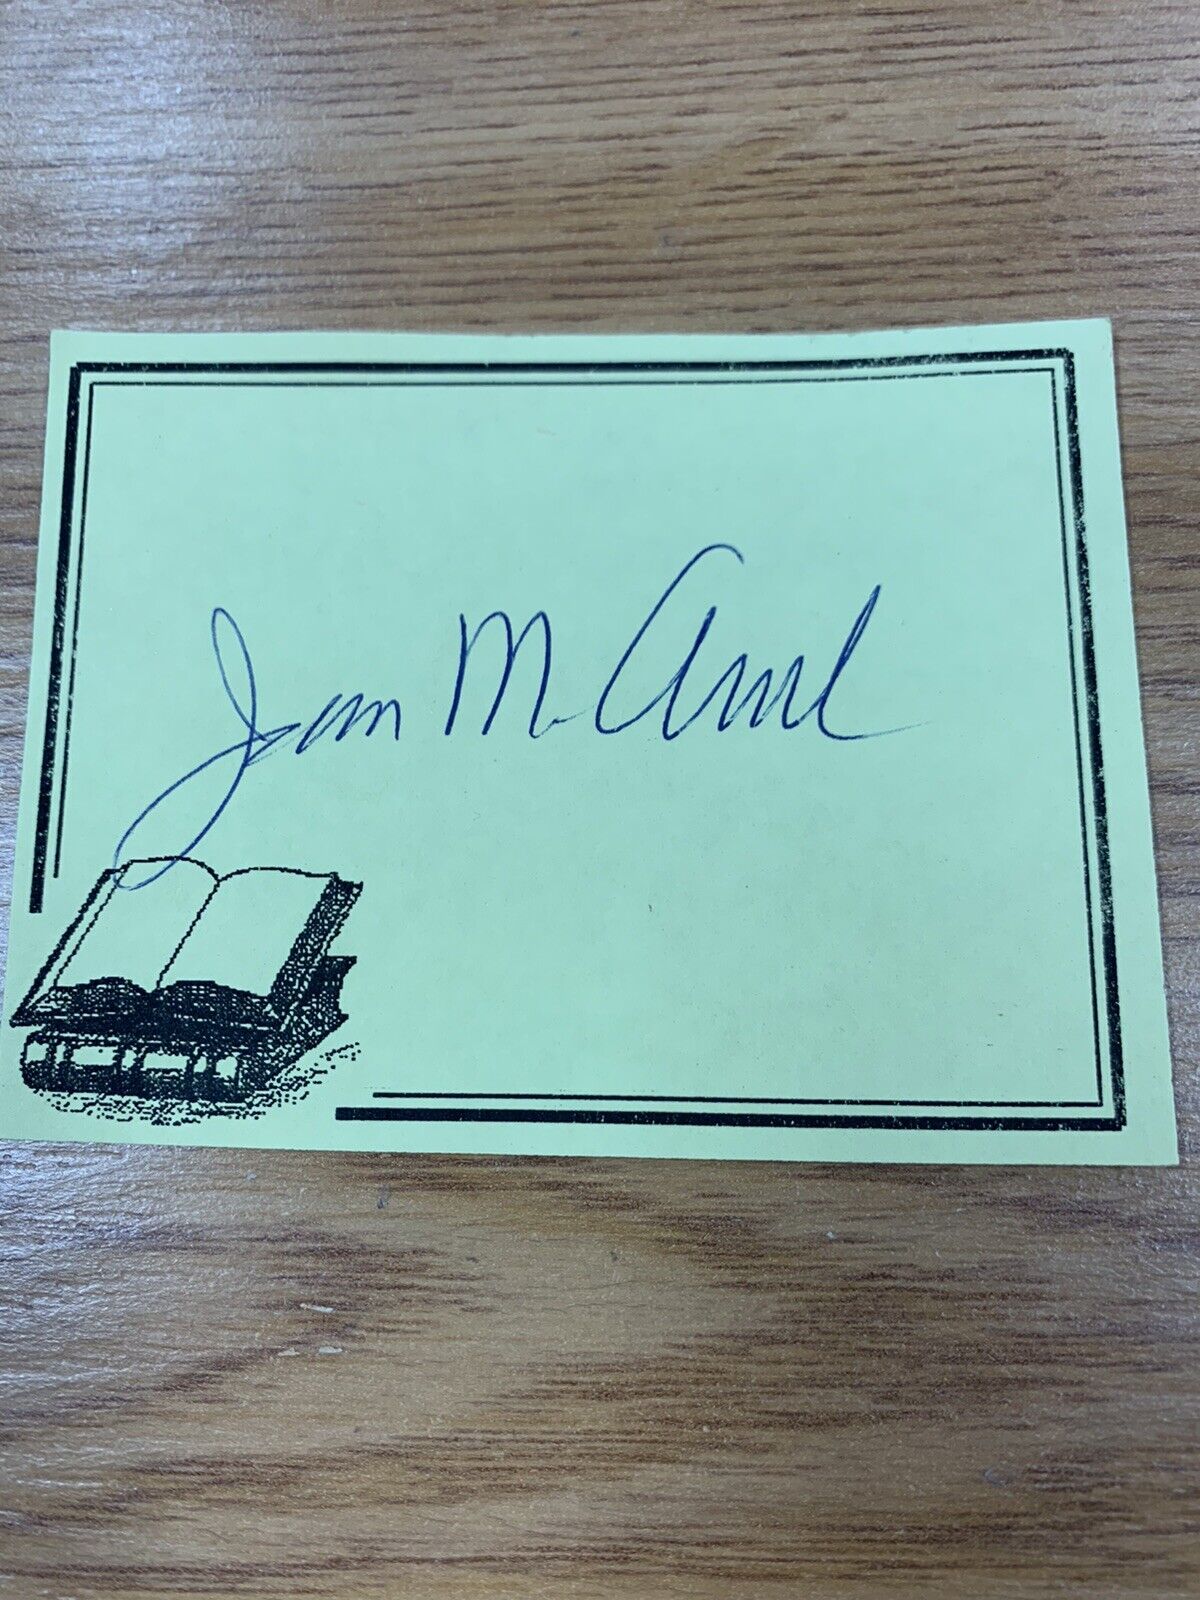 Jean M. Auel American Author Signed Bookplate Autographed New